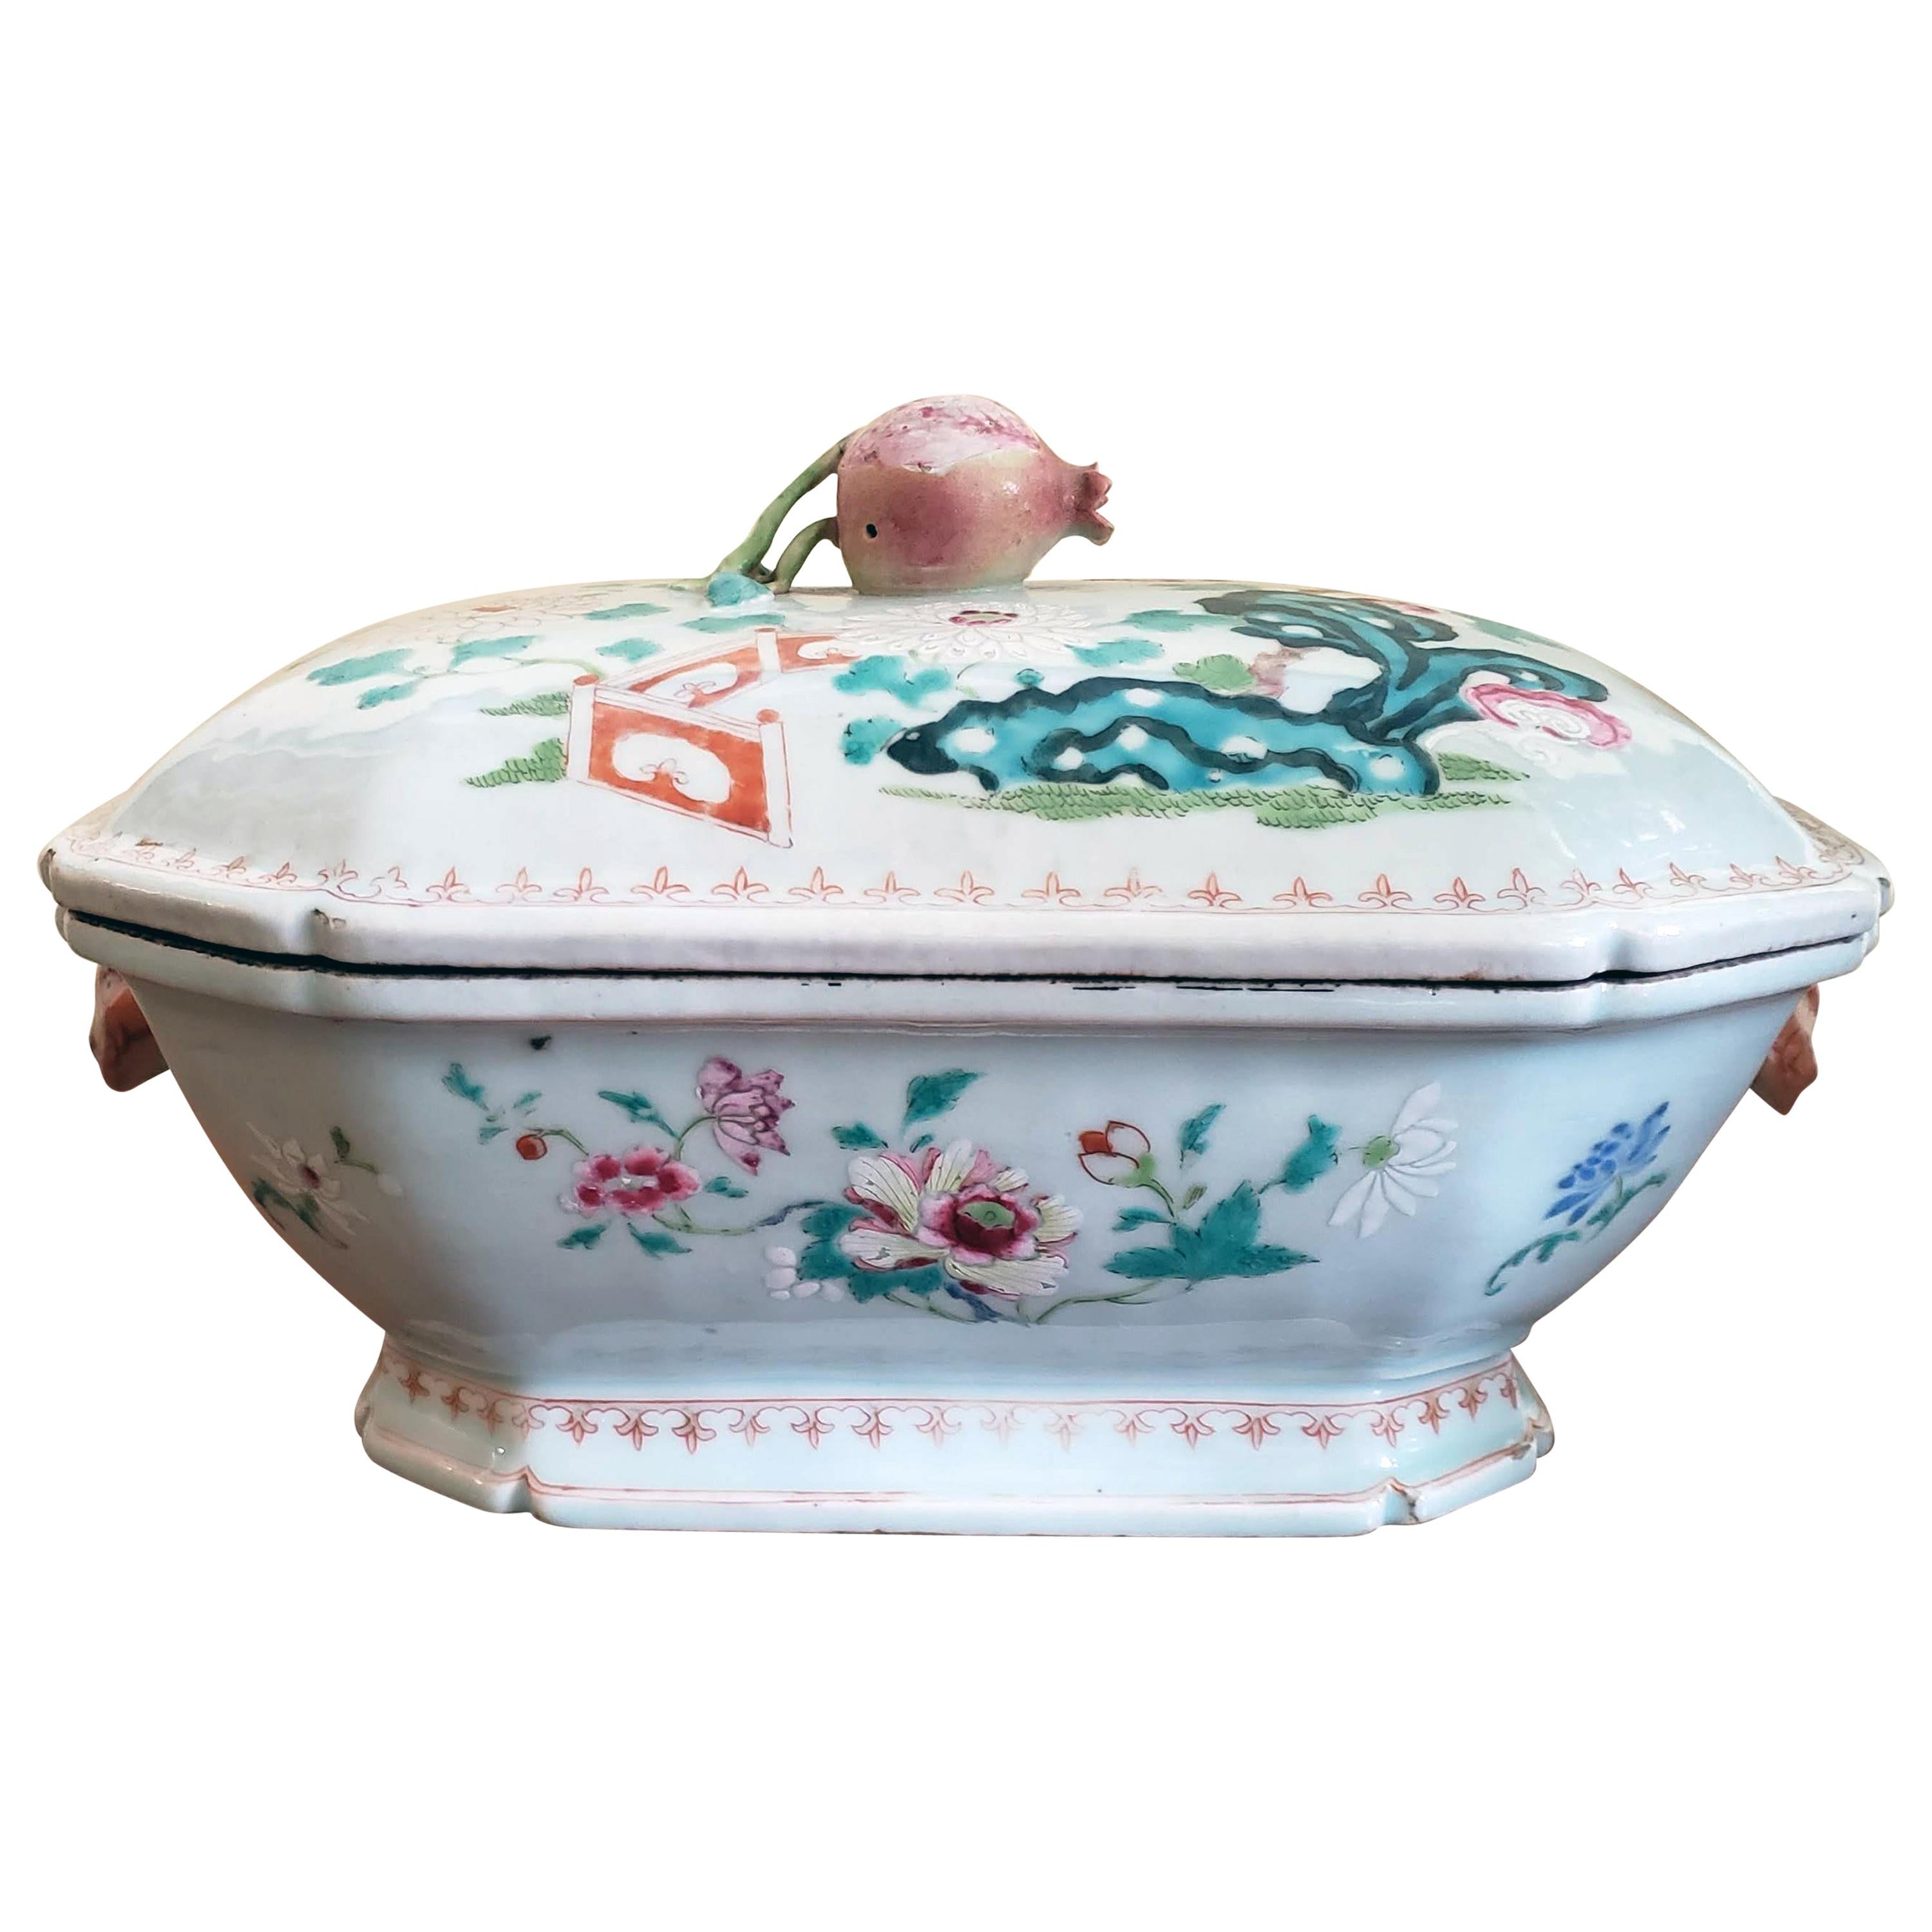 Chinese Export Porcelain Famille Rose Tureen and Cover, circa 1750-1765